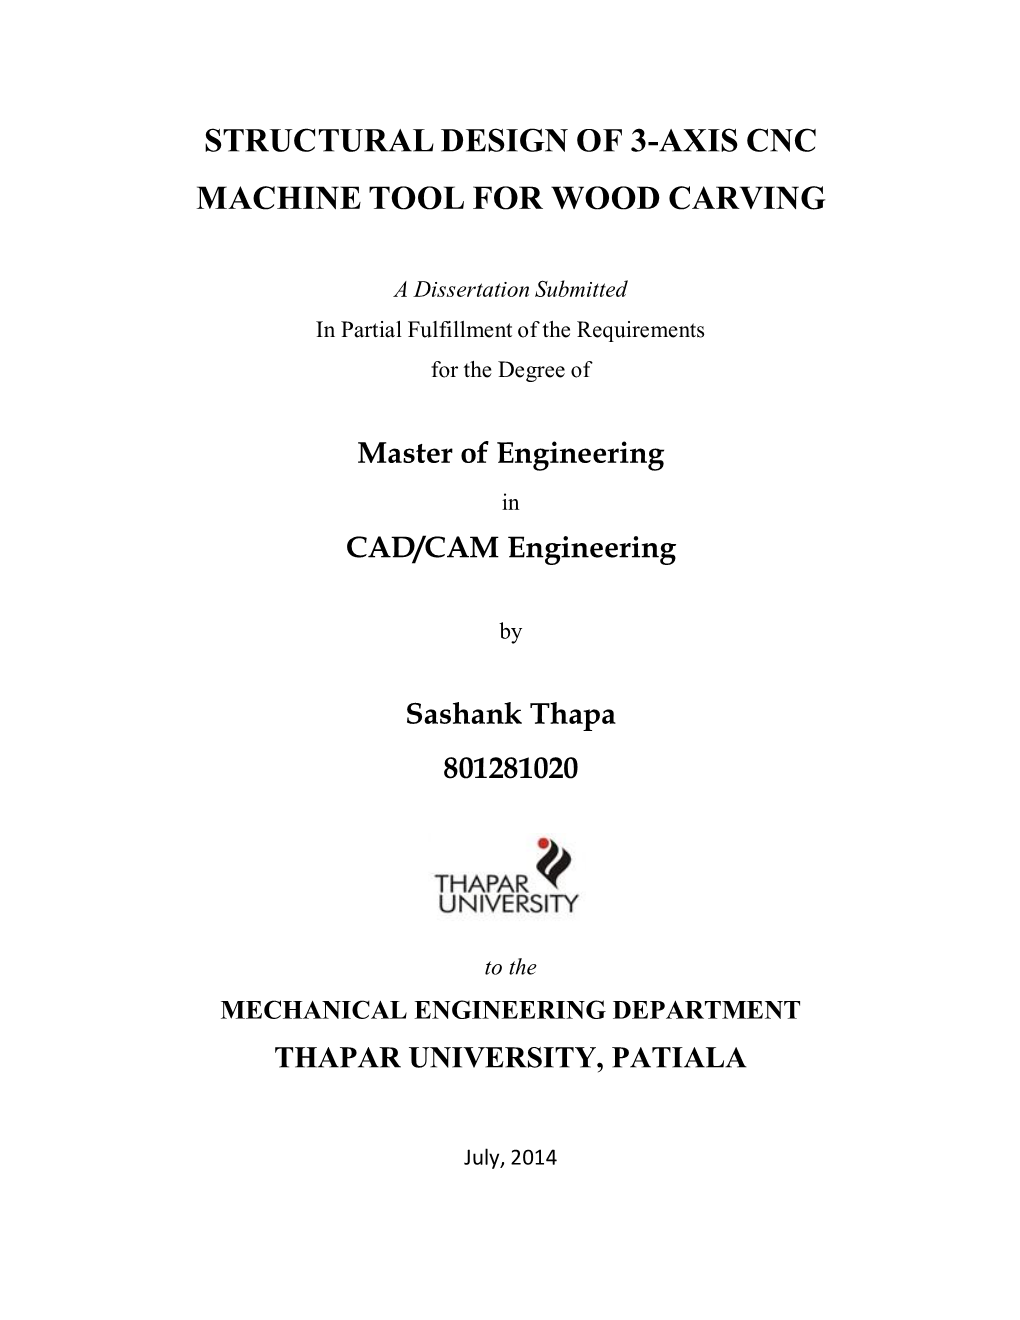 Structural Design of 3-Axis Cnc Machine Tool for Wood Carving